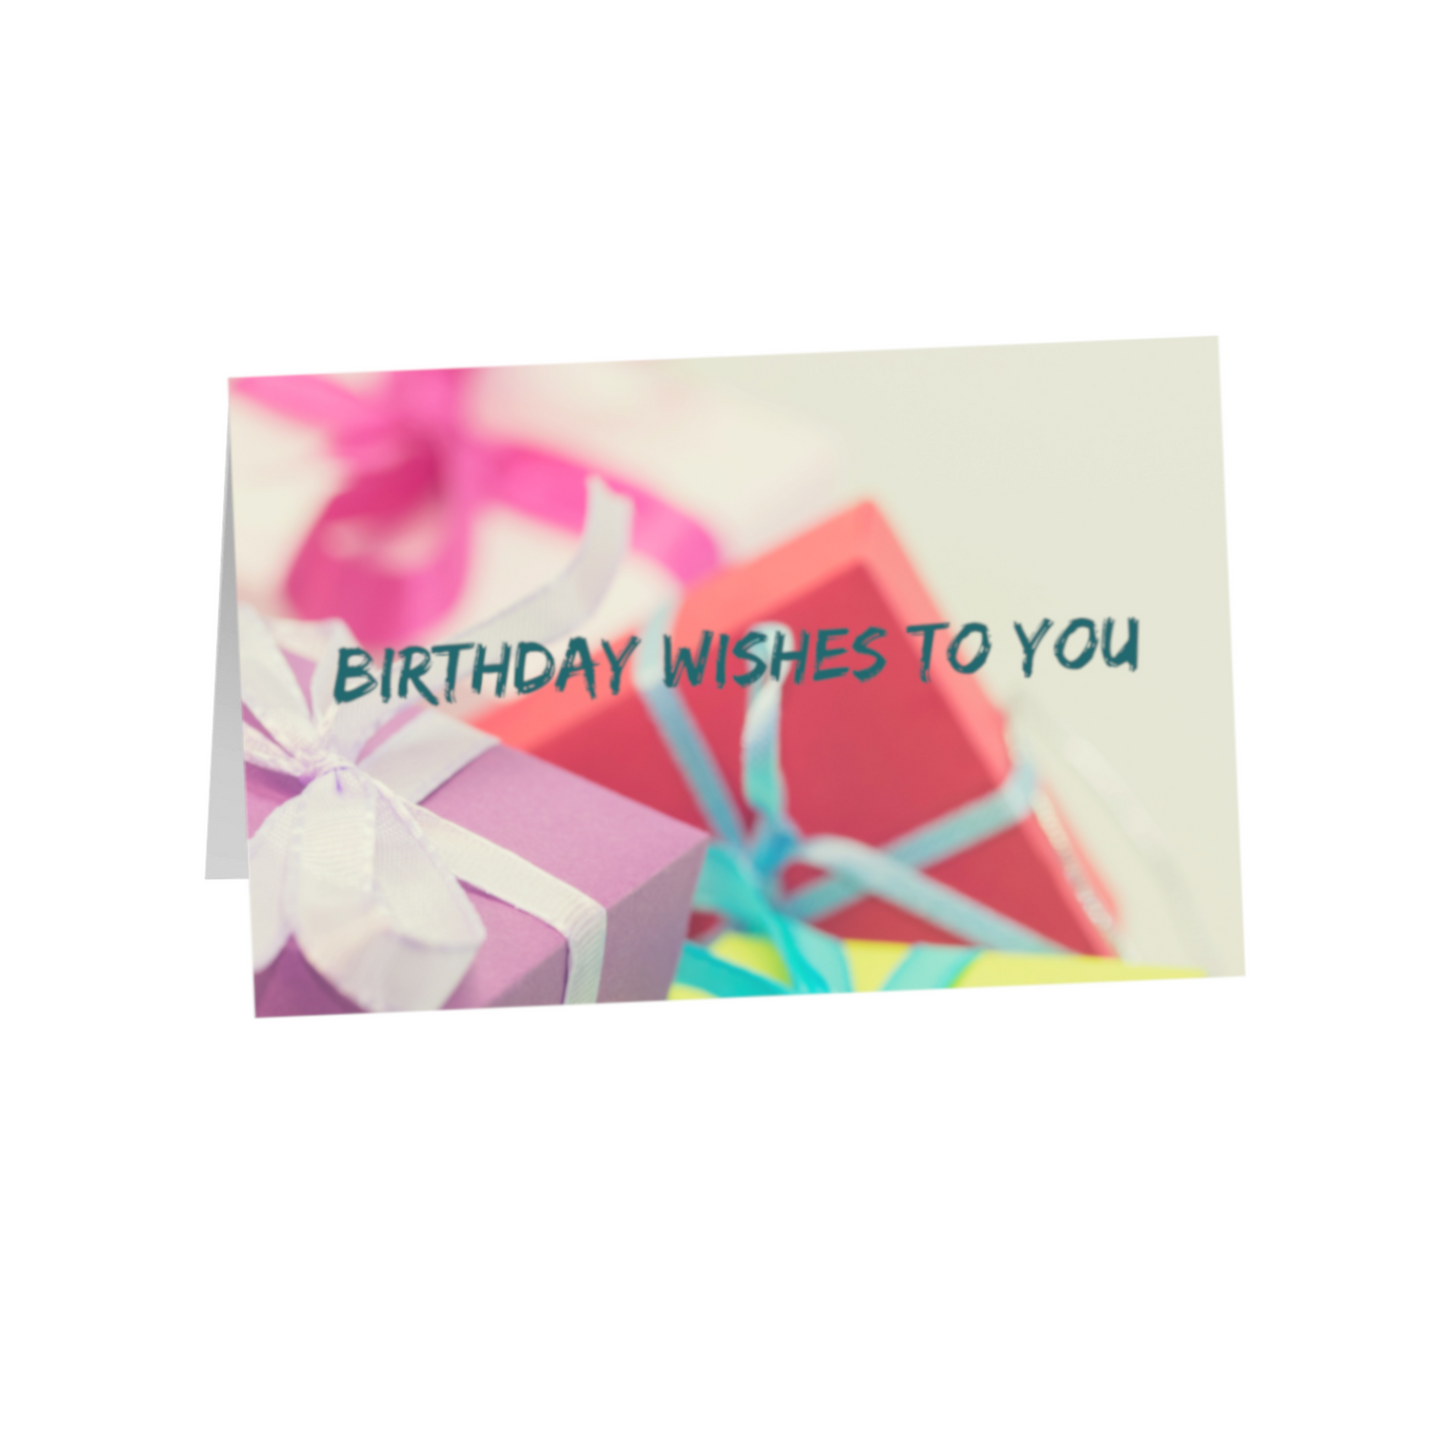 Birthday Wishes to You 8.5x5.5 Greeting Card